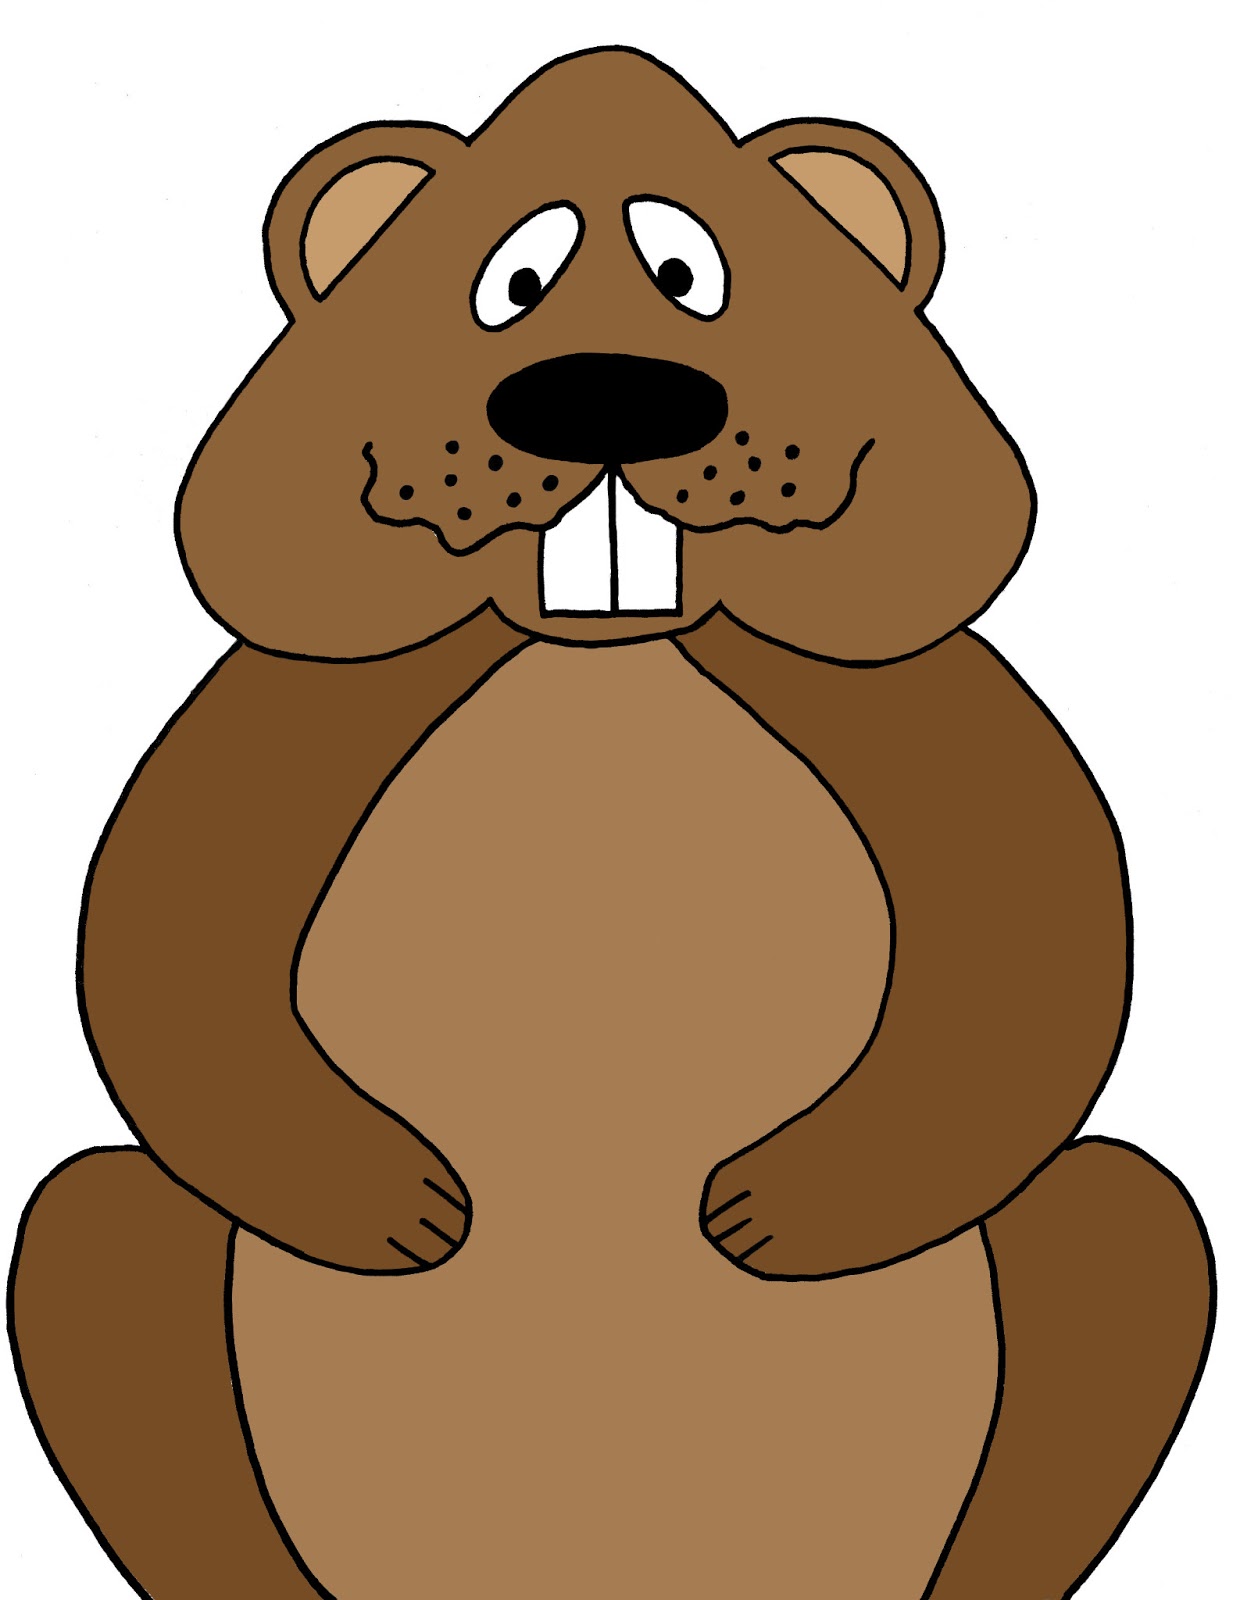 Woodchuck 20clipart | Clipart Panda - Free Clipart Images